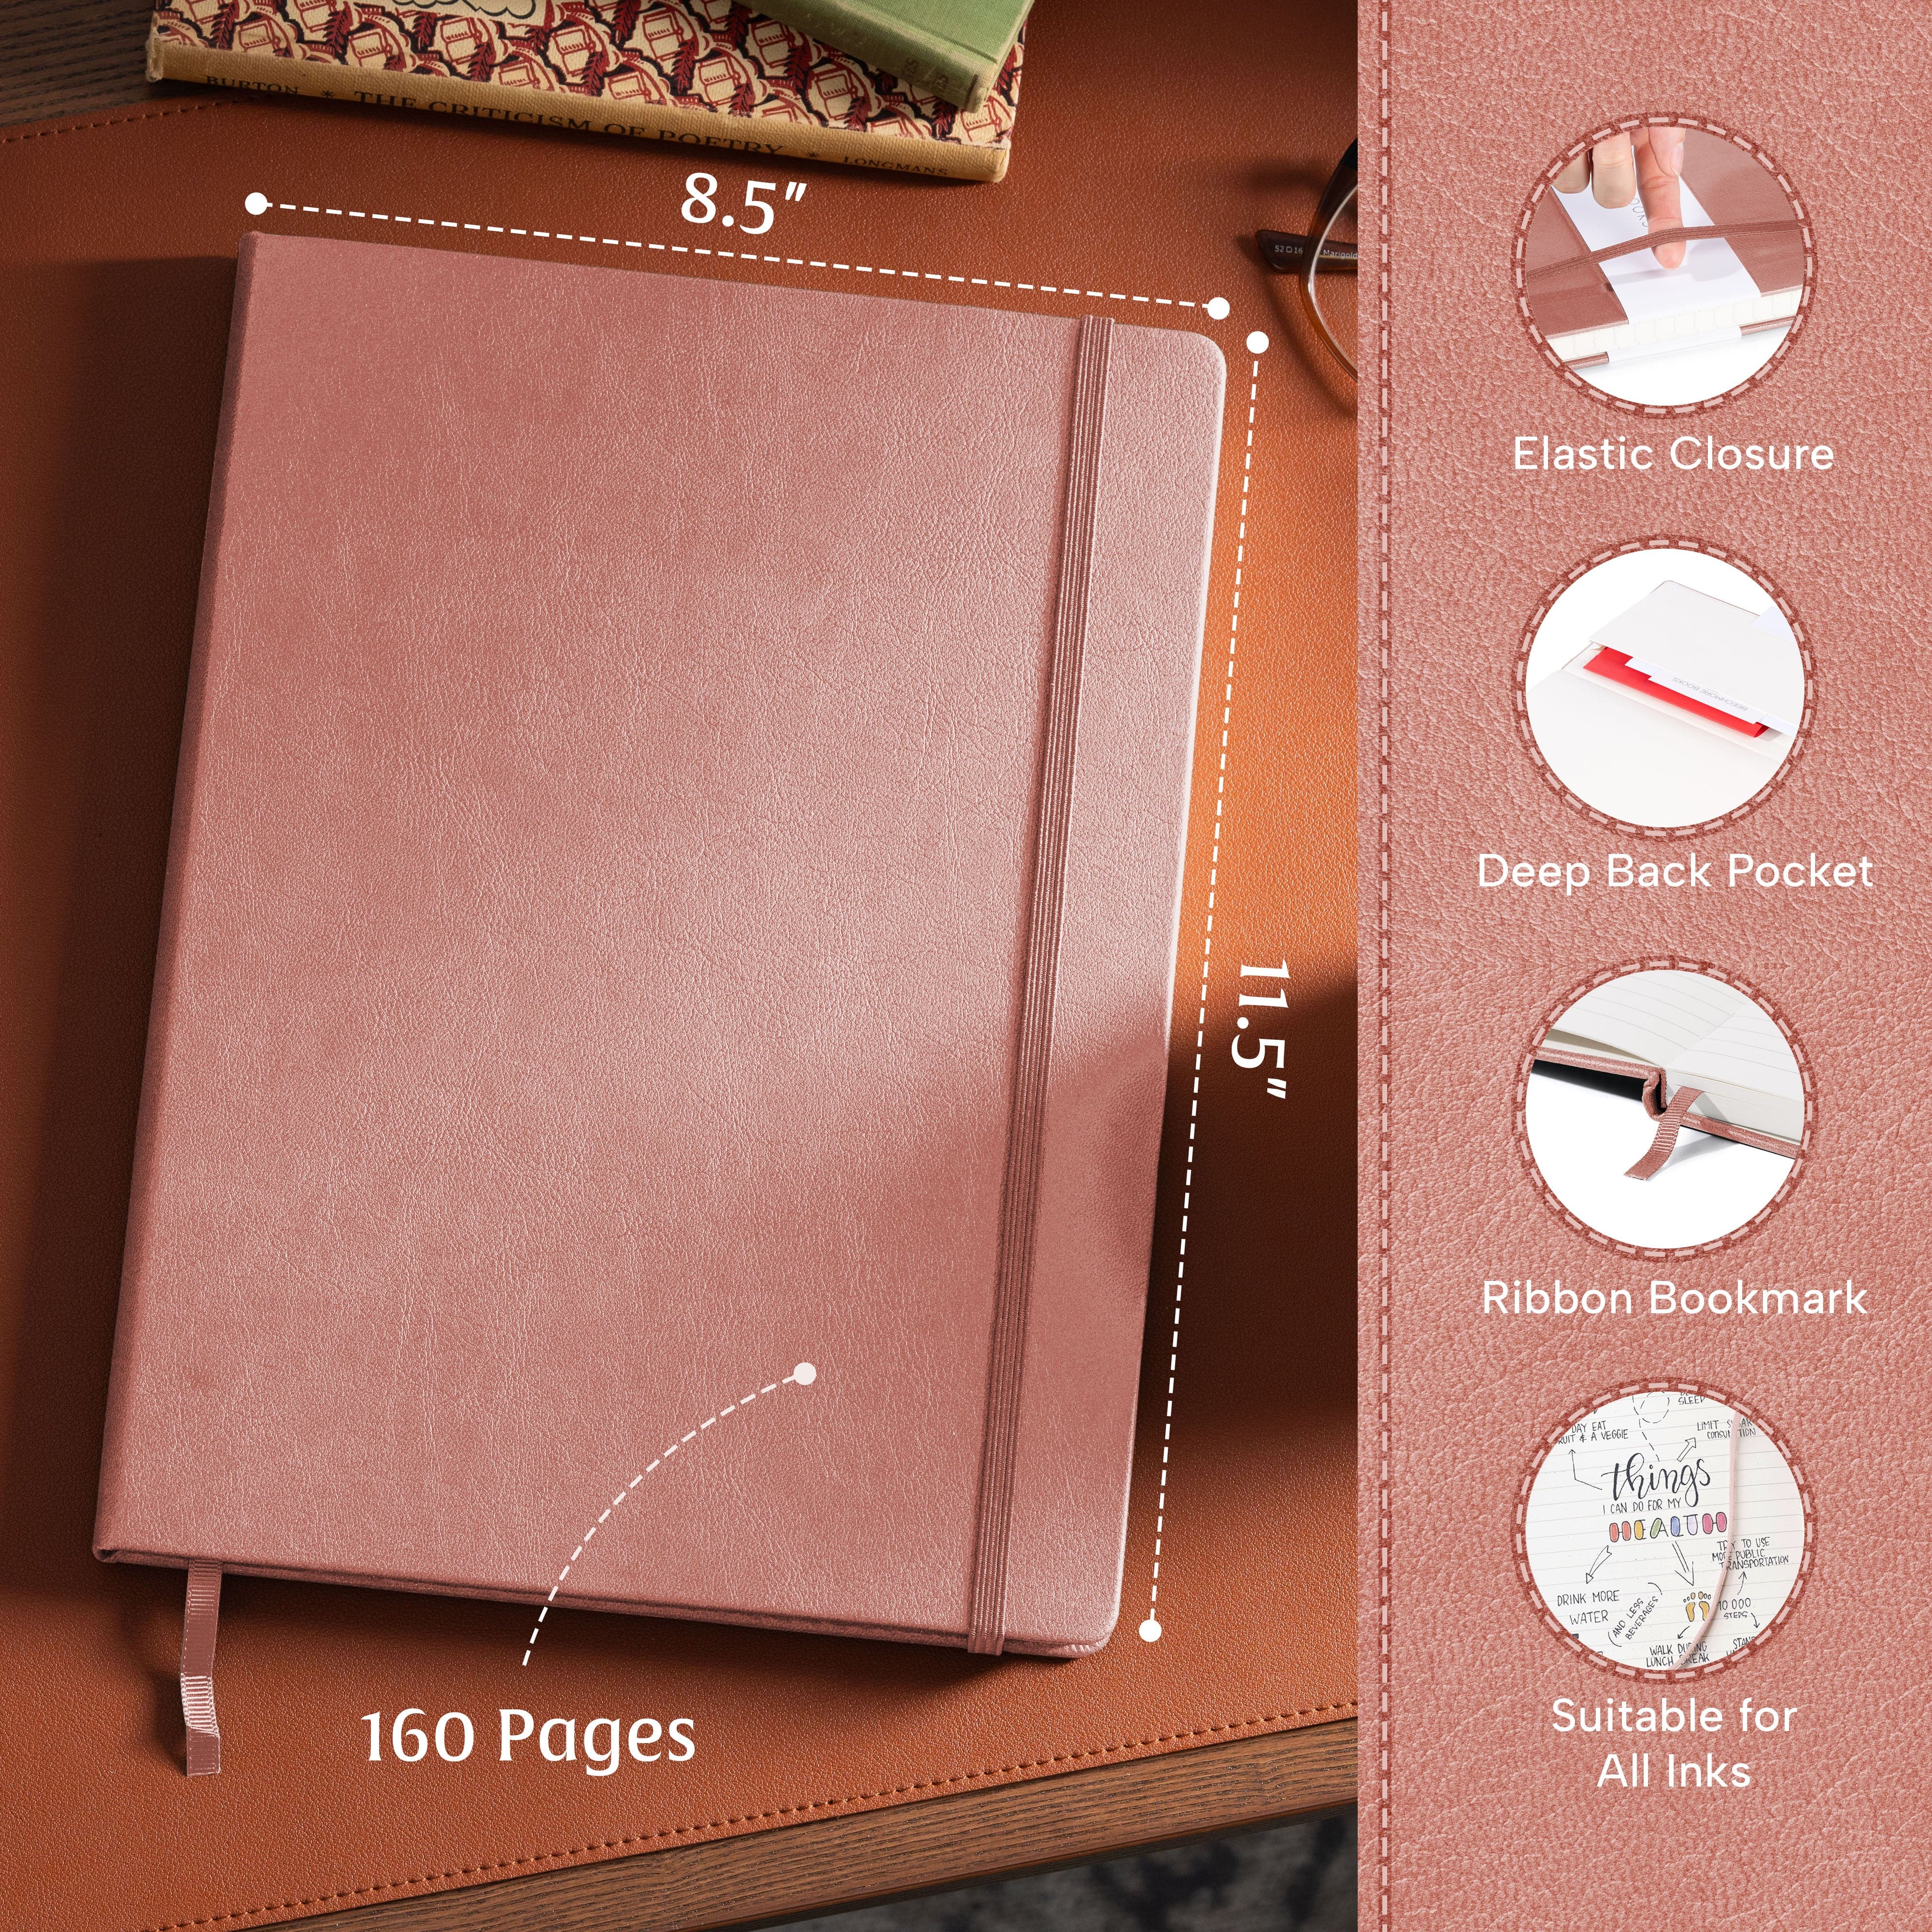 Sophisticated Rose Wood A4 notebook featuring crisp ruled lines, designed for professionals and creatives alike.